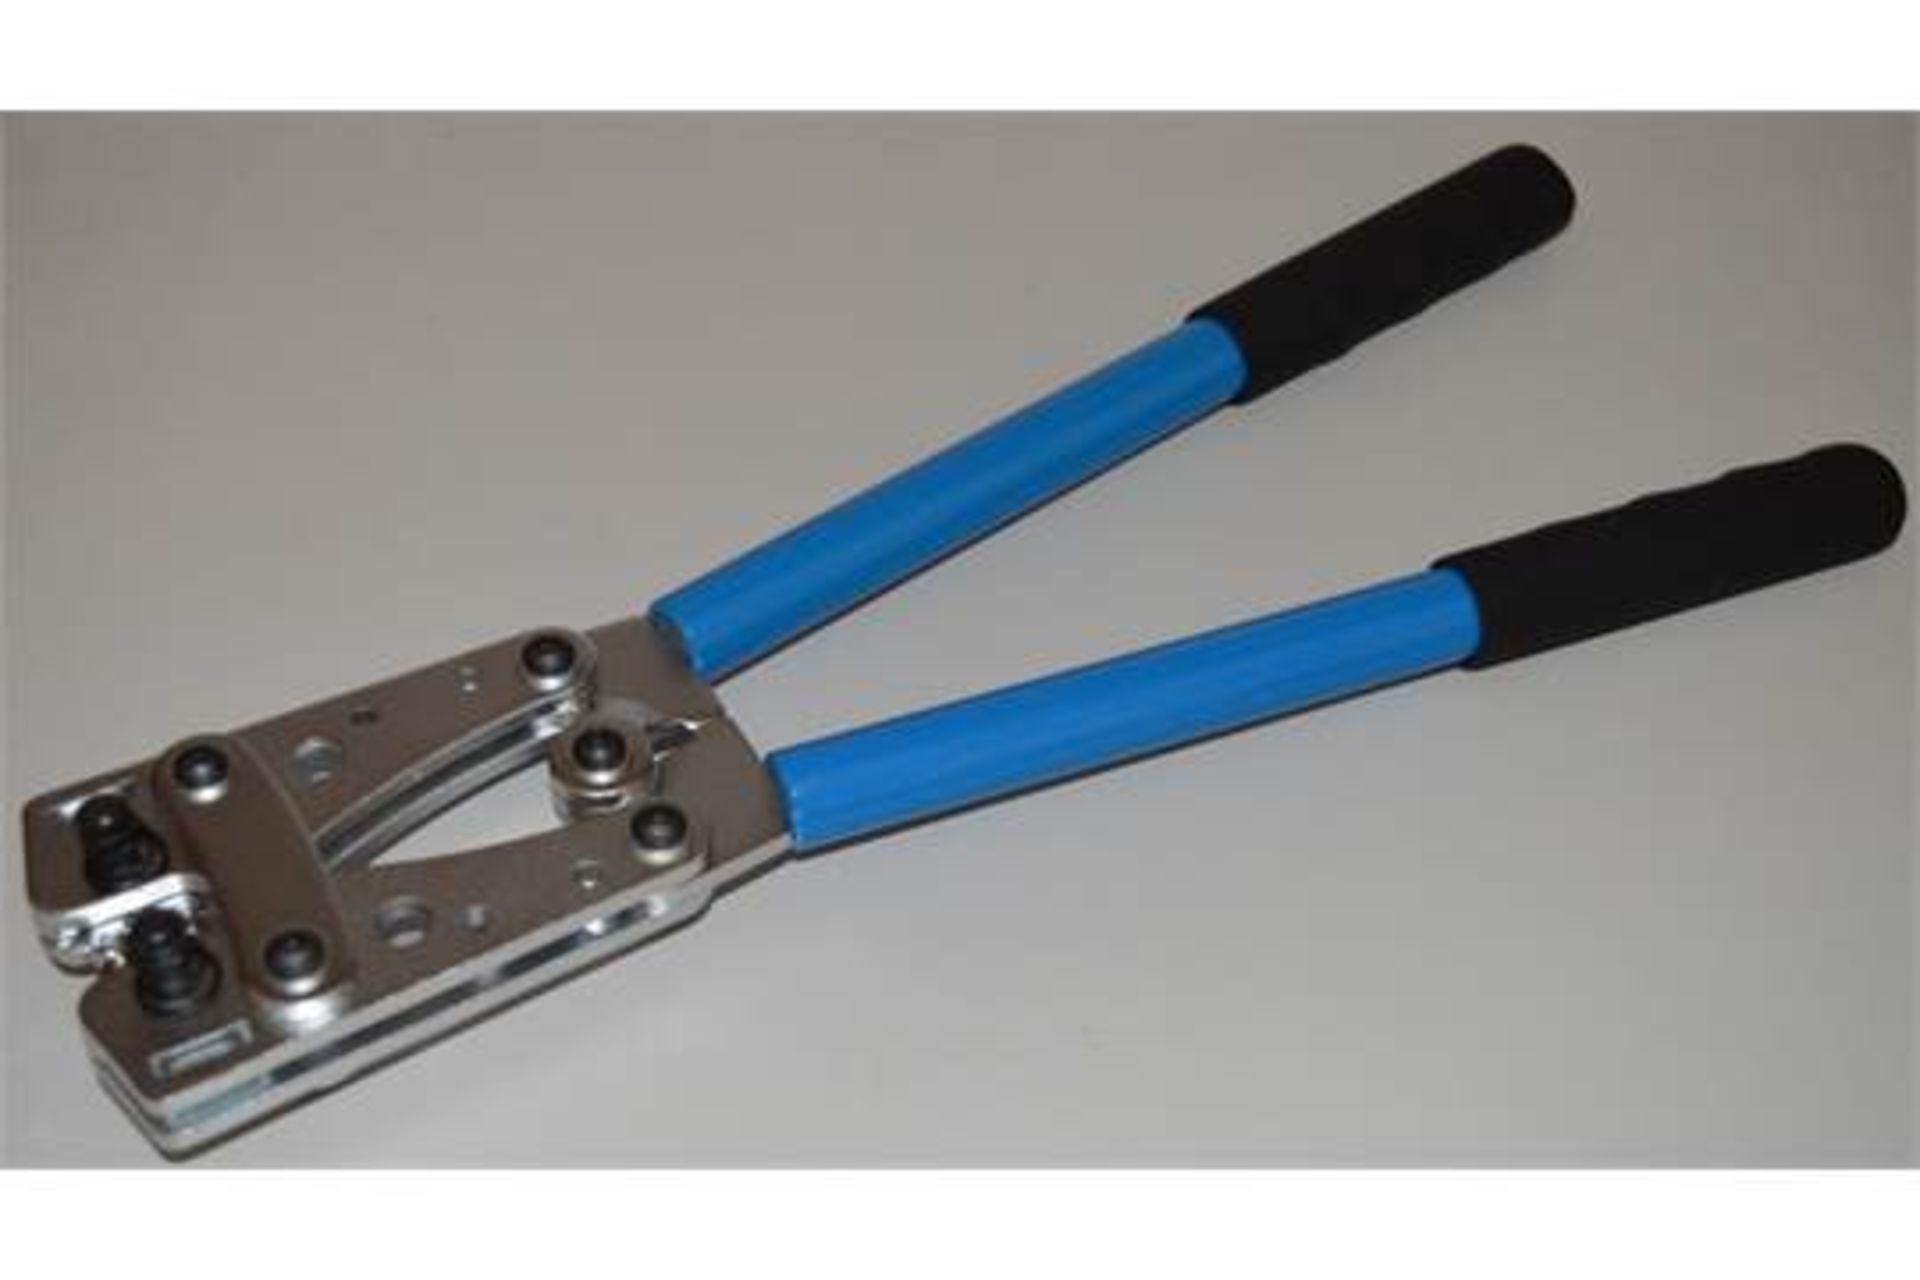 1 x HD Copper Tube Terminal Crimp Tool With Adjustable Hex - 38cm Length - XXX Branded - New and - Image 7 of 10